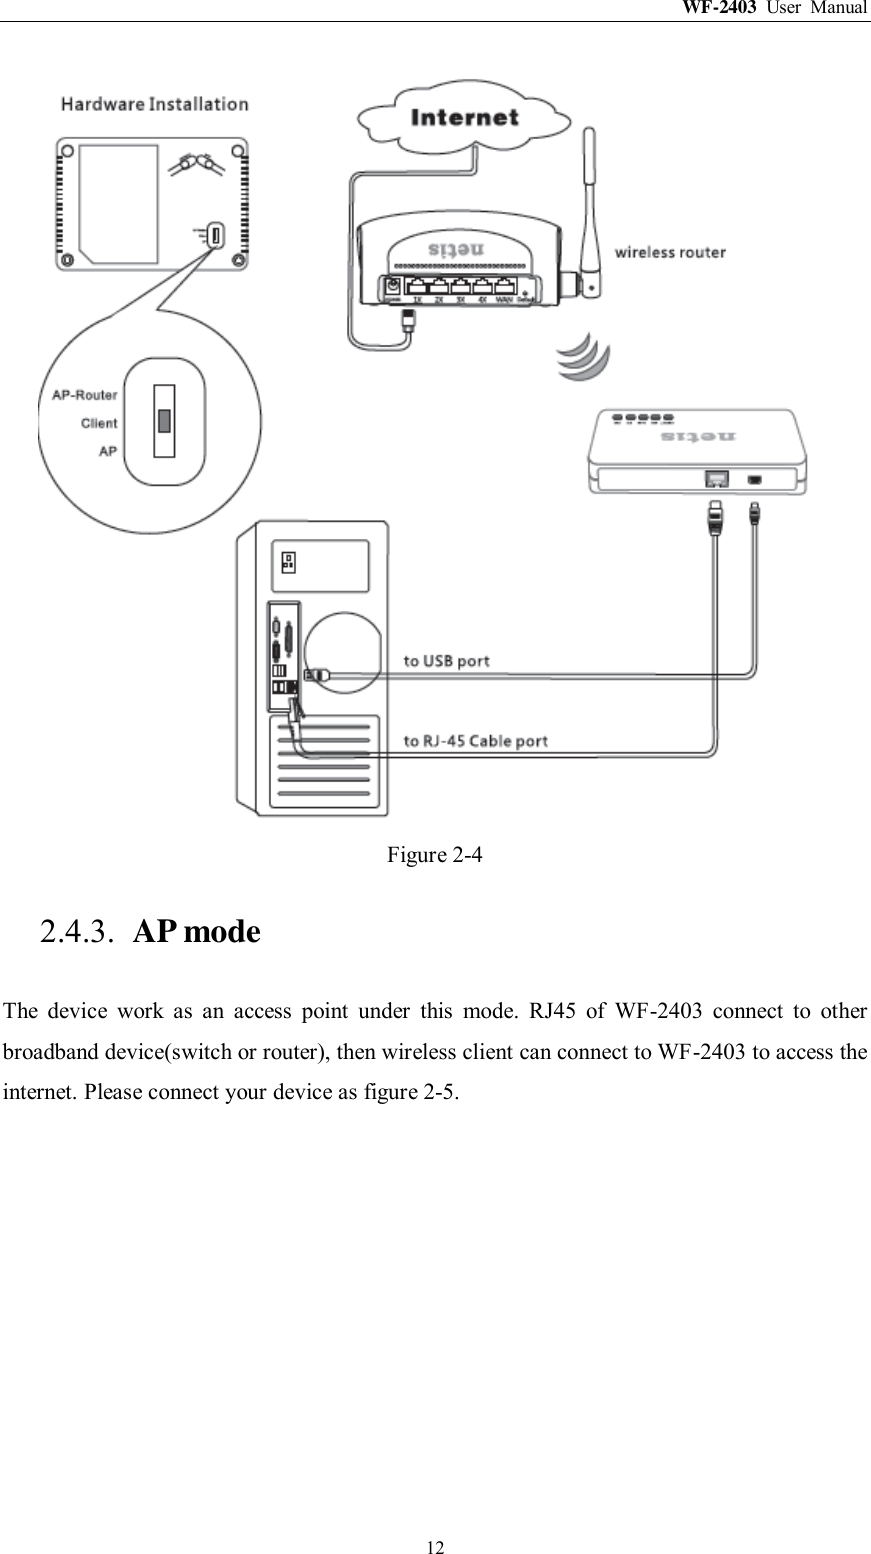 WF-2403  User  Manual  12  Figure 2-4 2.4.3. AP mode The  device  work  as  an  access  point  under  this  mode.  RJ45  of  WF-2403  connect  to  other broadband device(switch or router), then wireless client can connect to WF-2403 to access the internet. Please connect your device as figure 2-5. 